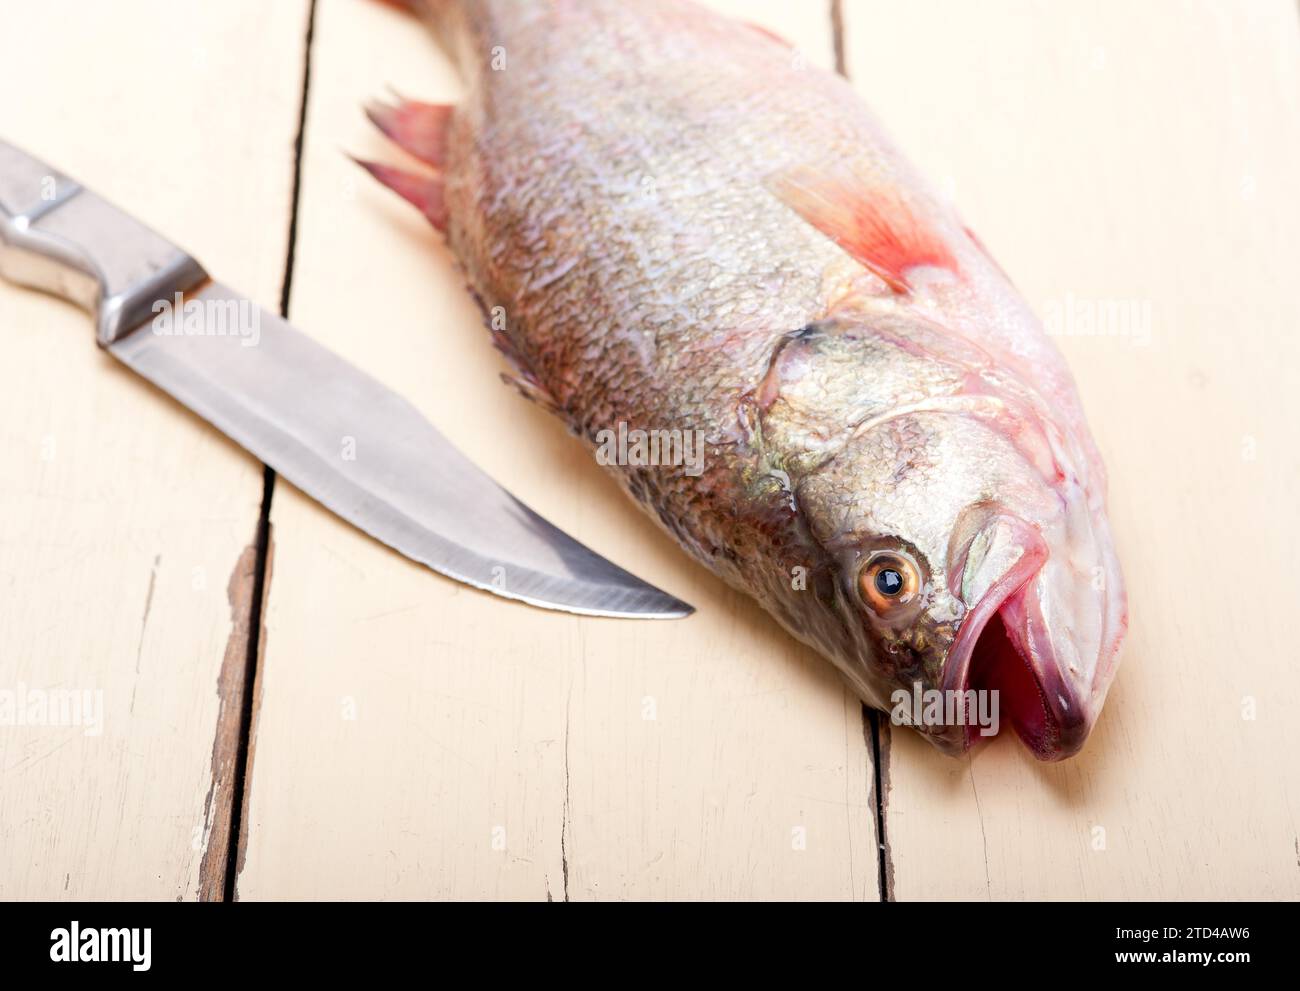 Fresh whole raw fish on a wooden table ready to cook Stock Photo